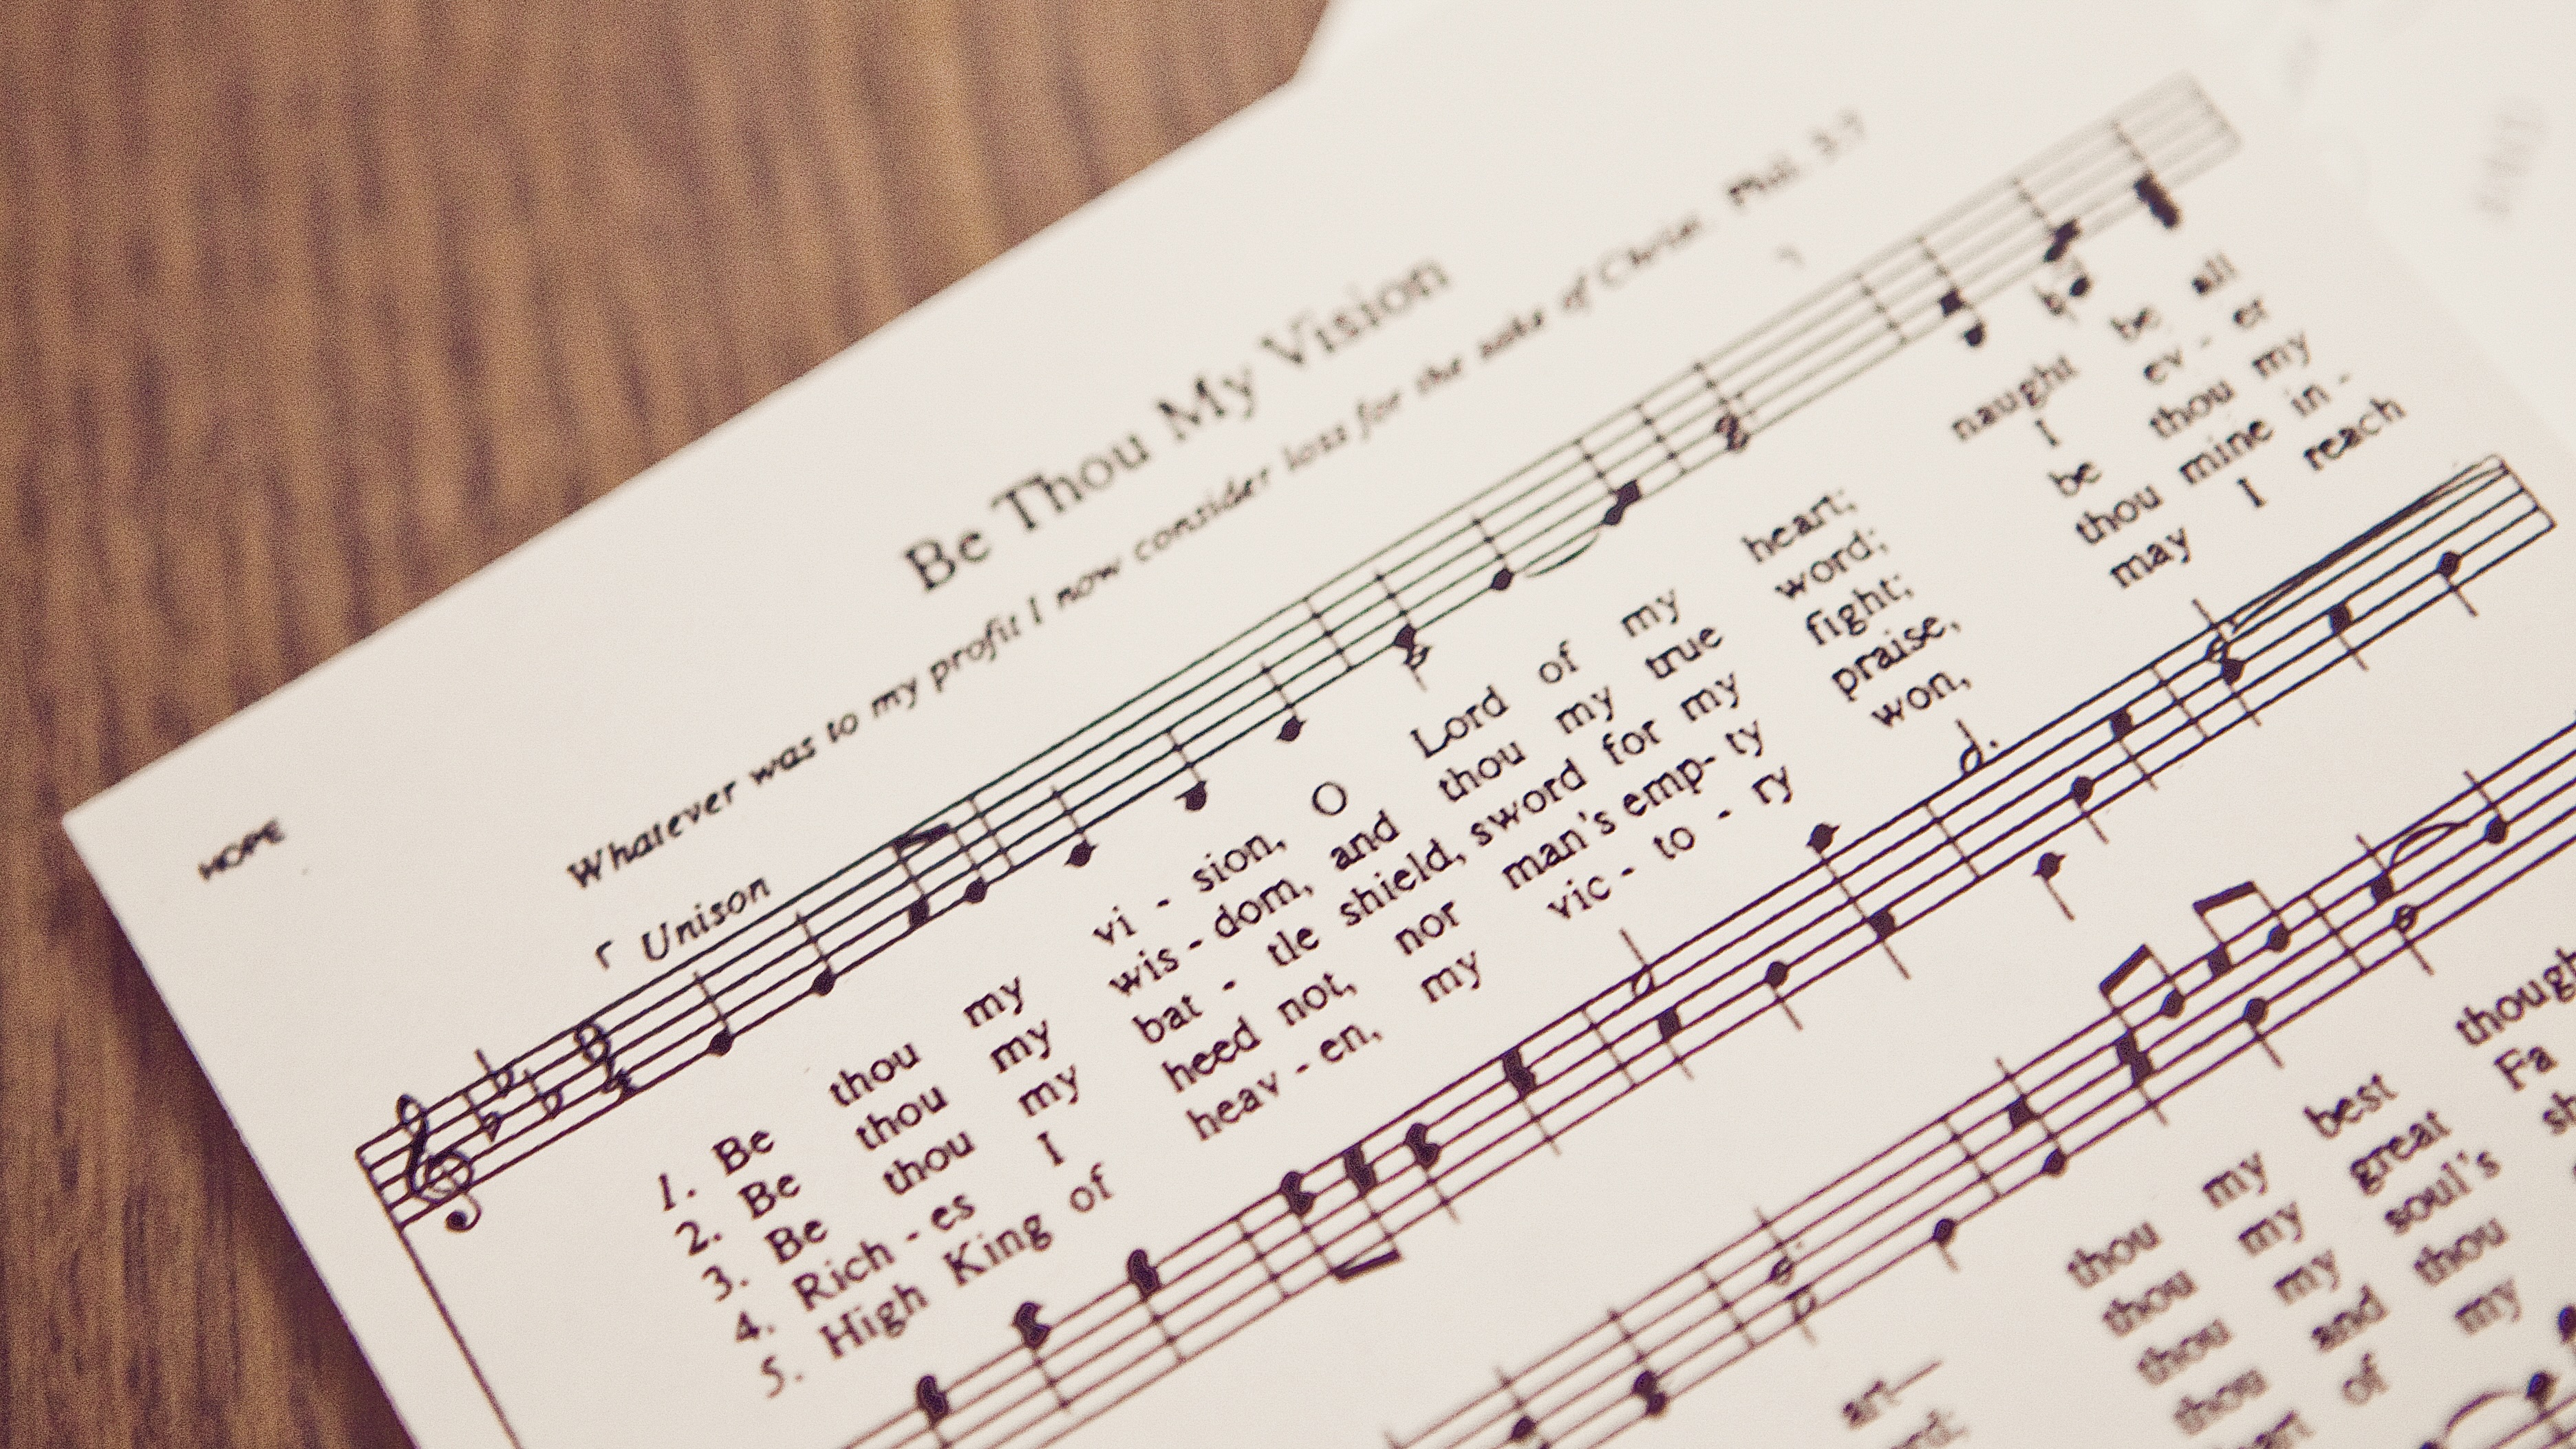 hymn_page_of_be_thou_my_vision-3744x5616 image